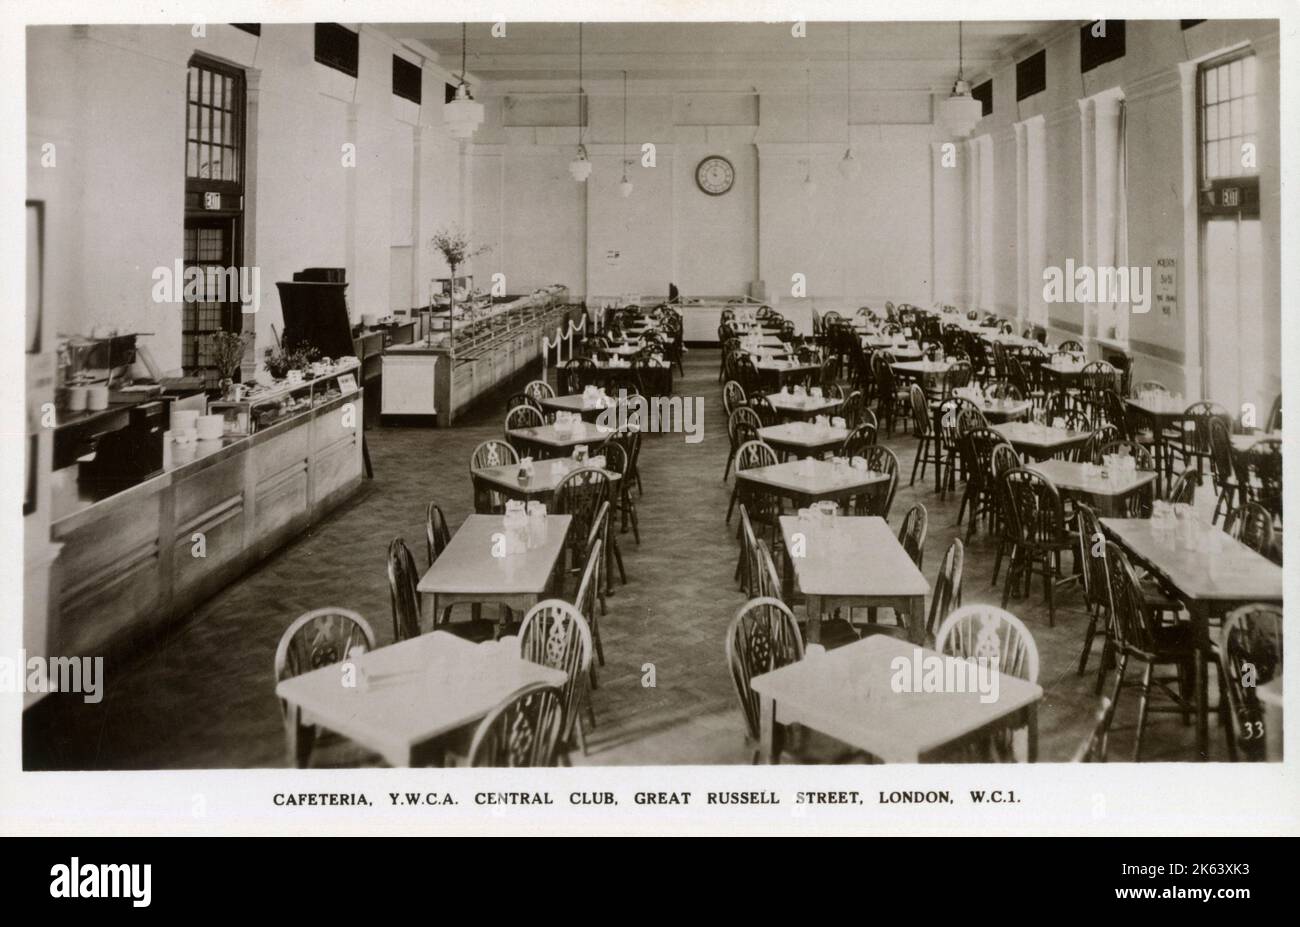 The YWCA - Central Club - Great Russell Street, London - The Cafeteria. Datum: Ca. 1910s Stockfoto